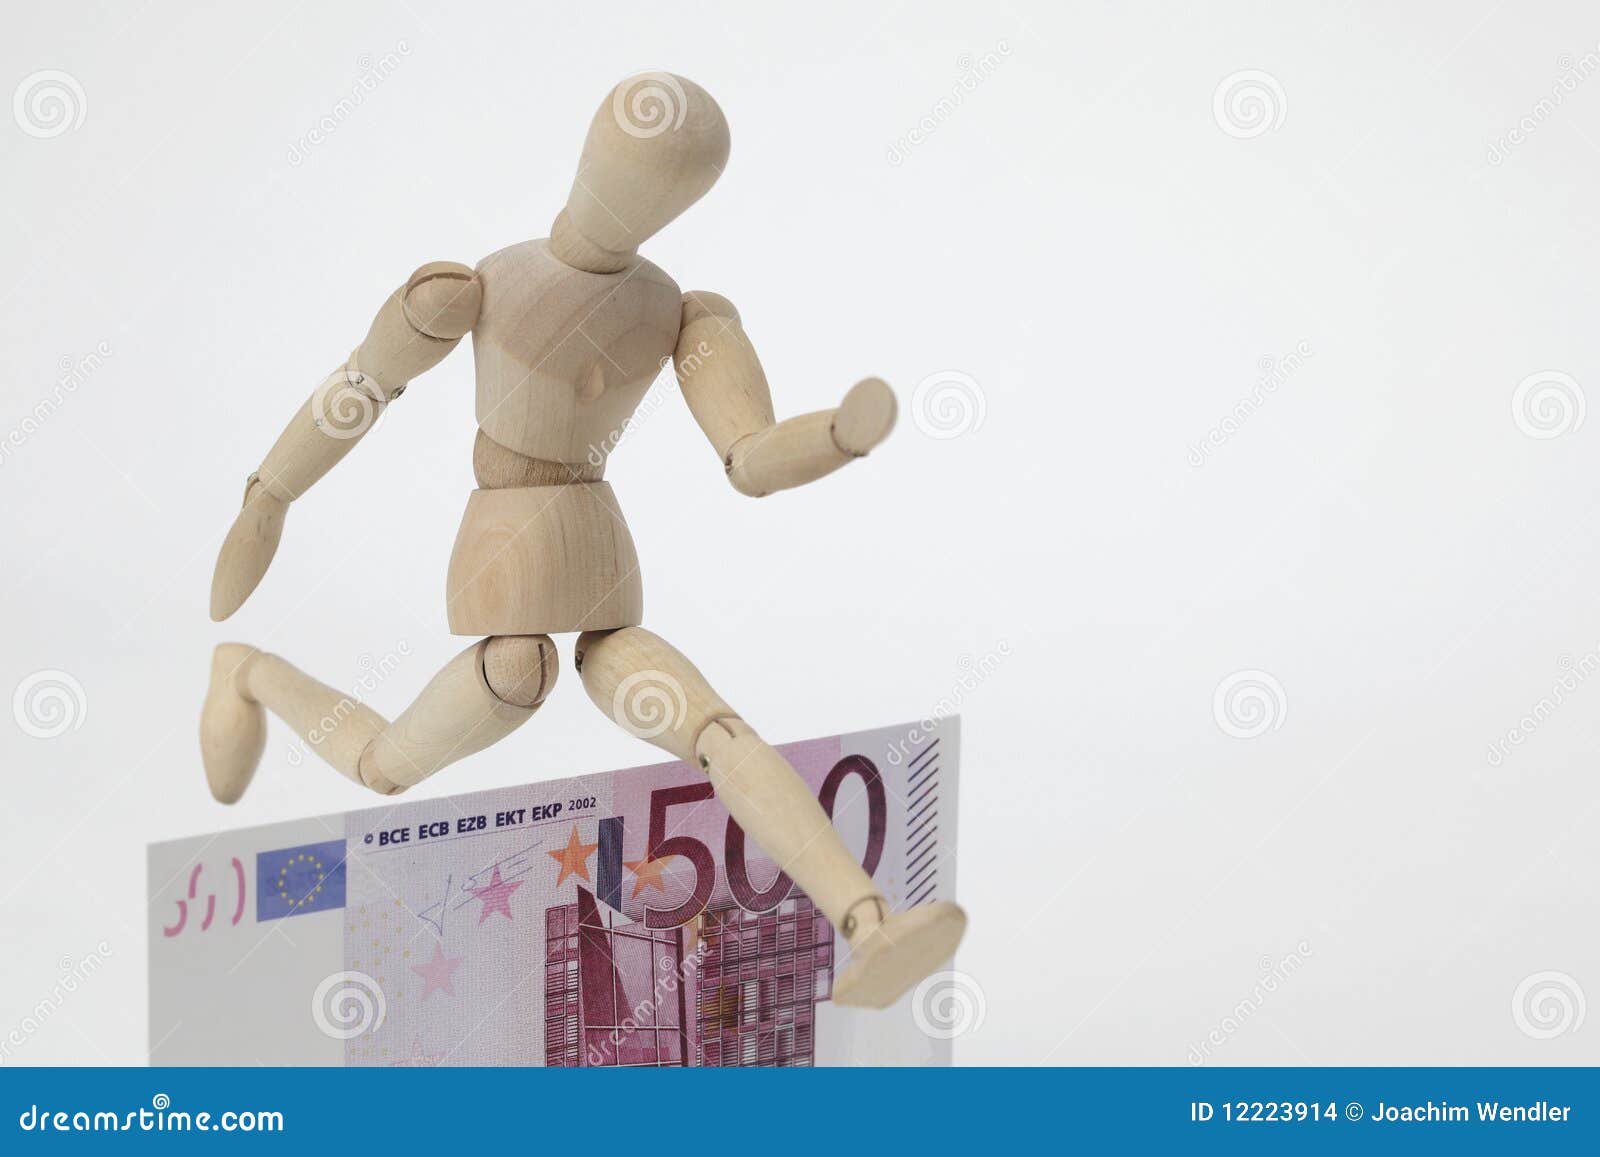 jointed doll jumping over a 500-euro-banknote